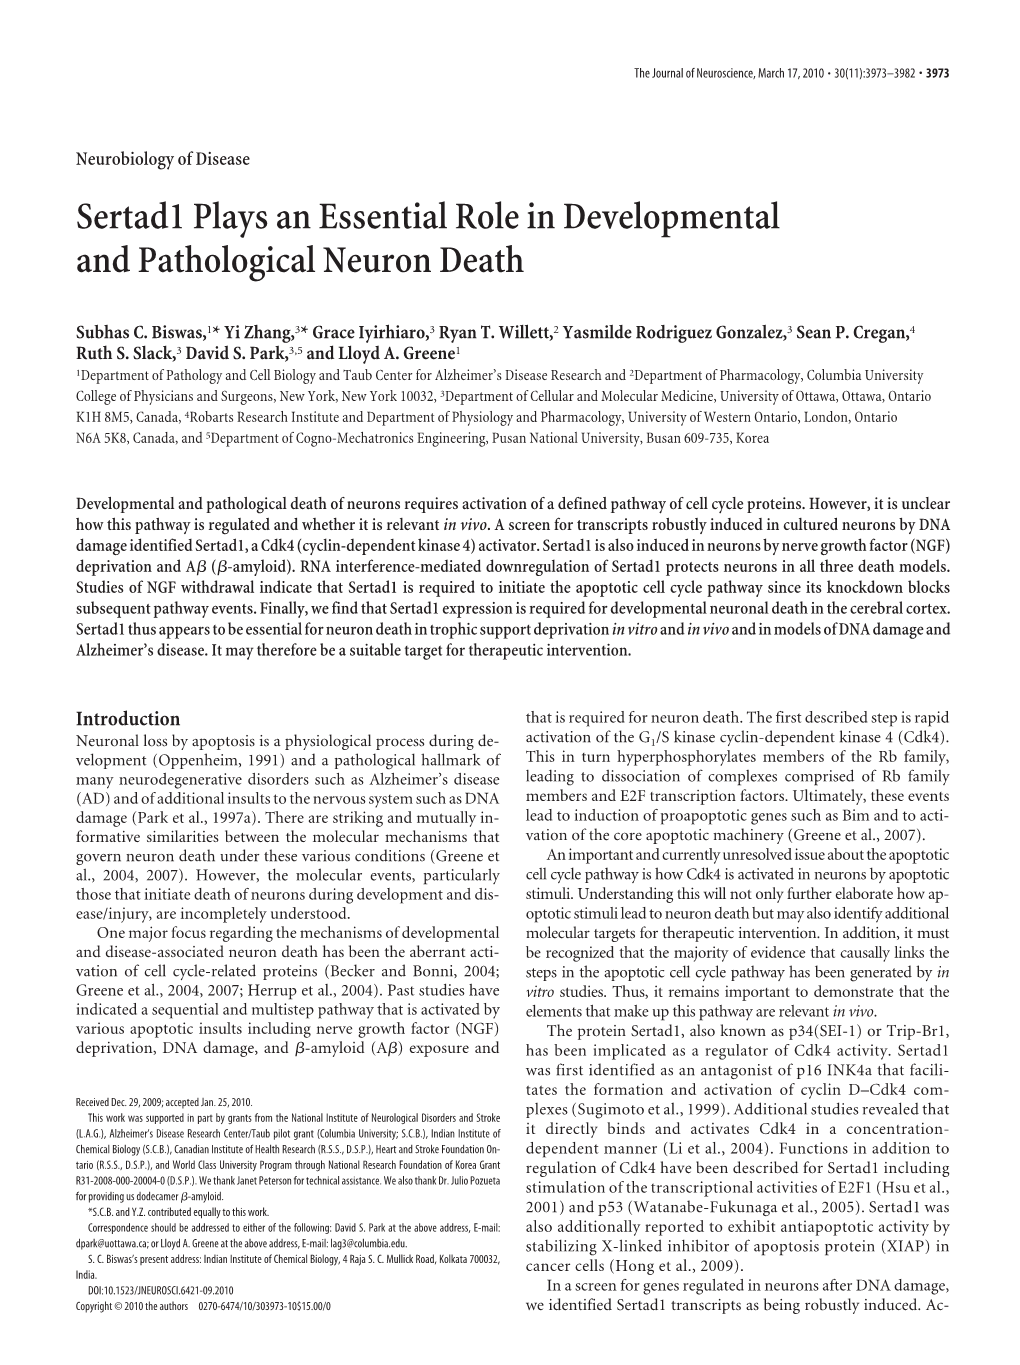 Sertad1 Plays an Essential Role in Developmental and Pathological Neuron Death